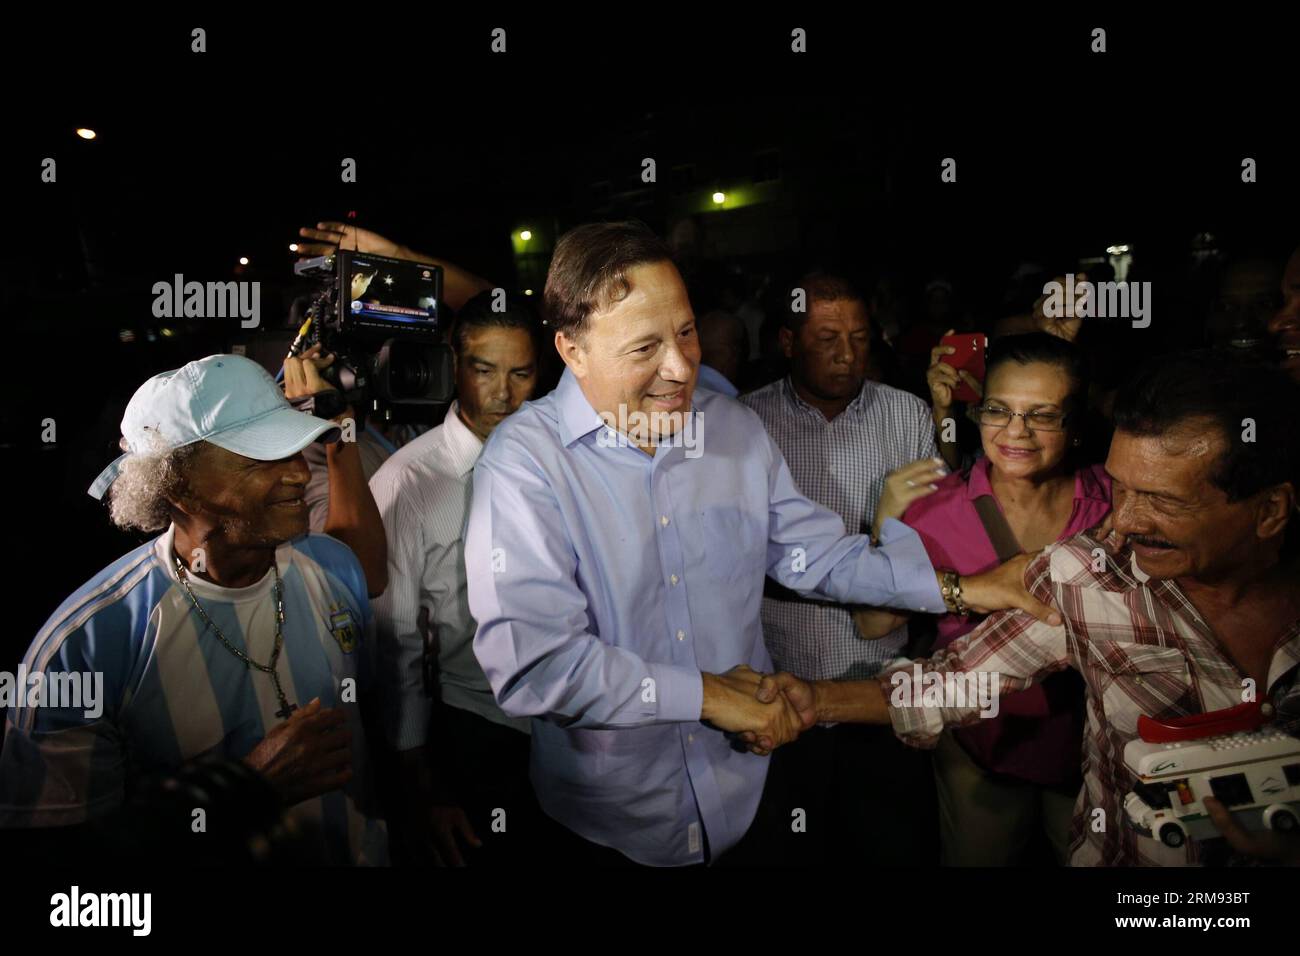 PANAMA CITY, May 5, 2014 (Xinhua) -- Panama s President-elect Juan Carlos Varela (C) greets his supporters upon his arrival at a mass in Panama City, capital of Panama, May 5, 2014. Juan Carlos Varela from the opposition Panamenista Party won the presidential election, Supreme Electoral Court President Erasmo Pinilla said on Sunday.(Xinhua/Mauricio Valenzuela)(zhf) PANAMA-PANAMA CITY-POLITICS-ELECTIONS-PRESIDENT PUBLICATIONxNOTxINxCHN   Panama City May 5 2014 XINHUA Panama S President elect Juan Carlos Varela C greets His Supporters UPON His Arrival AT a Mass in Panama City Capital of Panama M Stock Photo